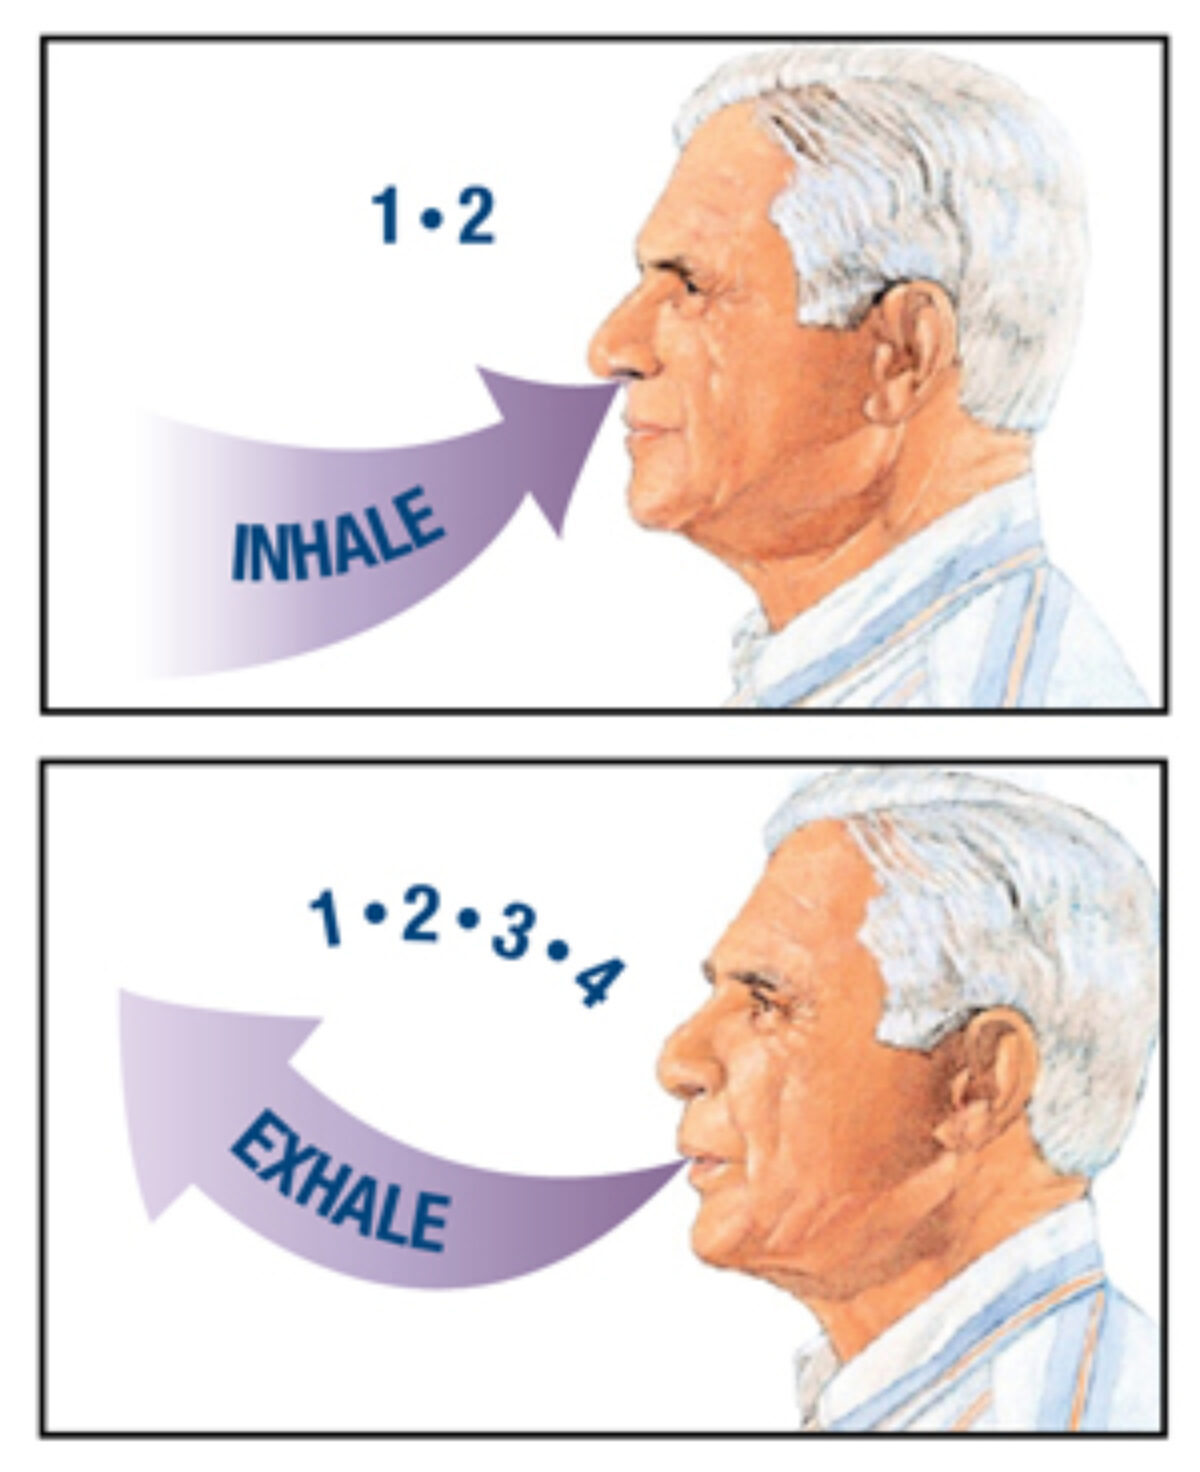 Pursed Lips Breathing: How To Do It Correctly - Lung Institute